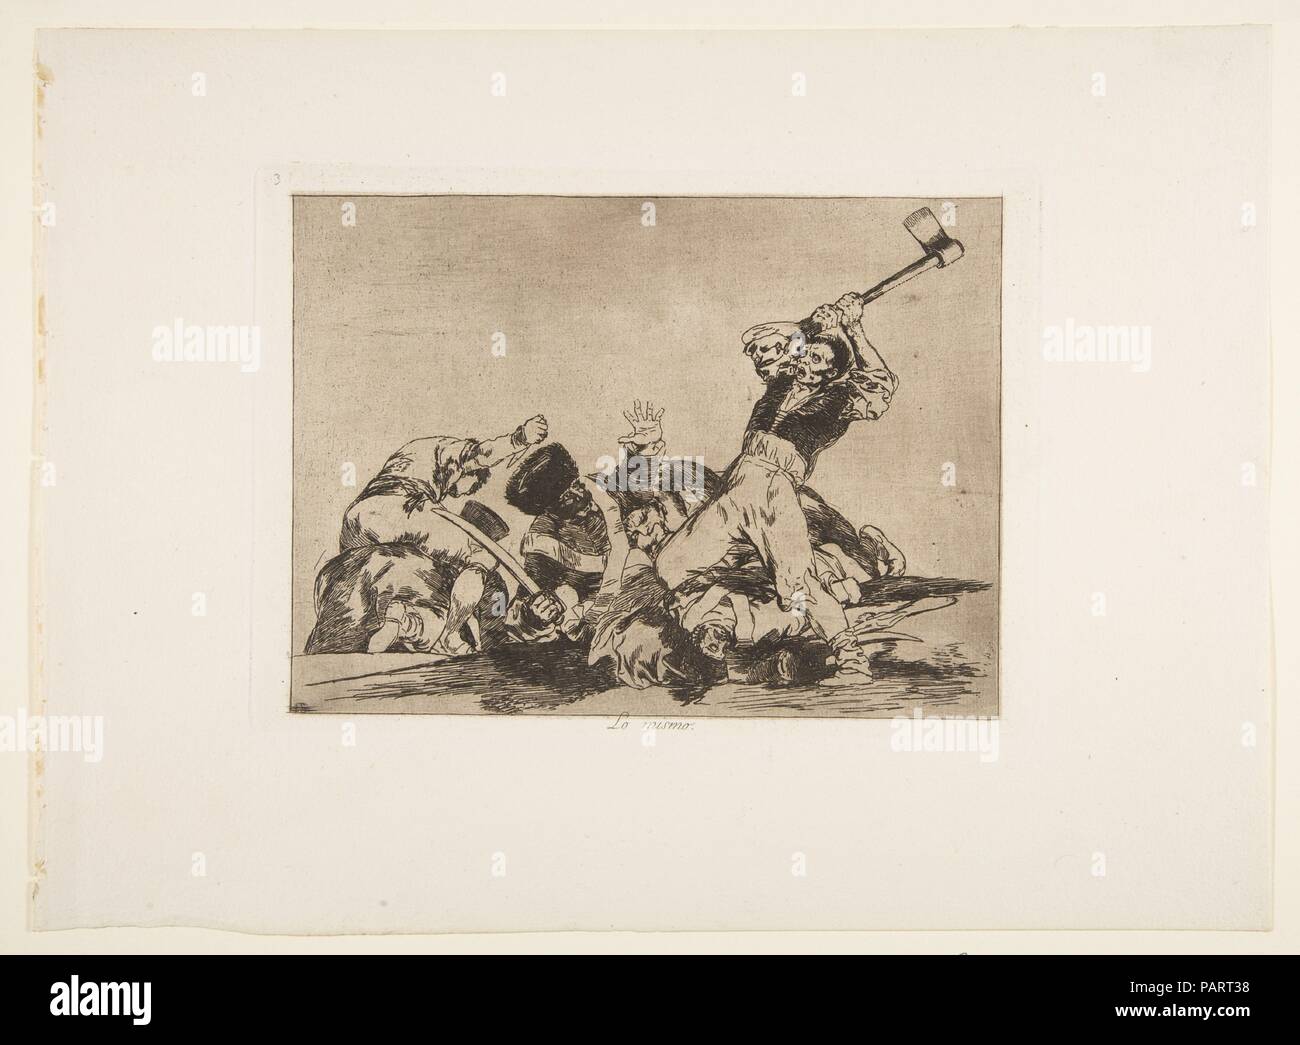 Plate 3 from 'The Disasters of War' (Los Desastres de la Guerra): 'The same. (Lo mismo'.). Artist: Goya (Francisco de Goya y Lucientes) (Spanish, Fuendetodos 1746-1828 Bordeaux). Dimensions: Plate: 6 1/4 × 8 9/16 in. (15.8 × 21.8 cm)  Sheet: 9 15/16 × 13 1/2 in. (25.2 × 34.3 cm). Series/Portfolio: Disasters of War. Date: 1810 ( published 1863). Museum: Metropolitan Museum of Art, New York, USA. Stock Photo